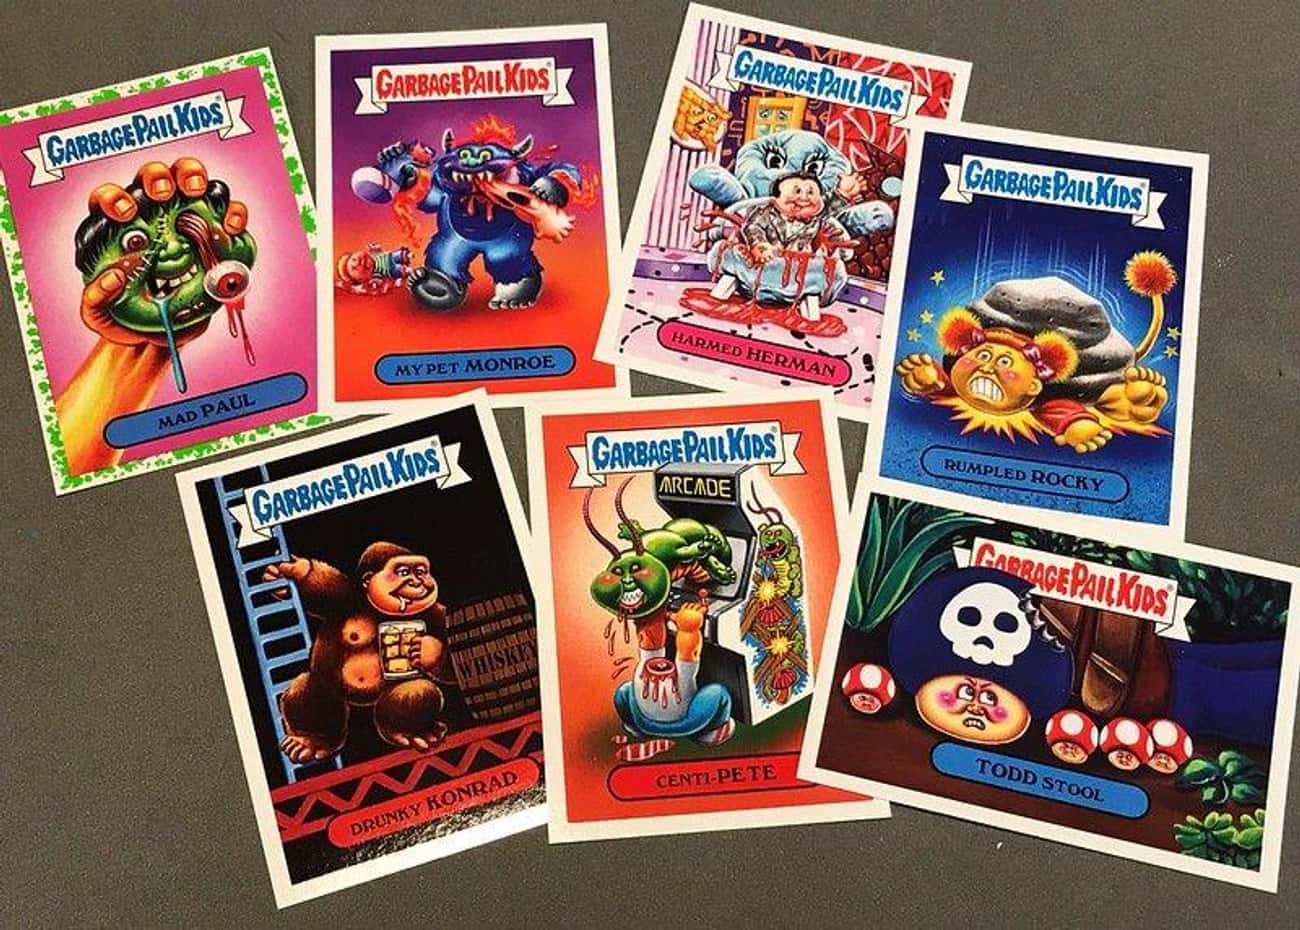 Topps Created The Garbage Pail Kids After Failing To Obtain The Rights To Cabbage Patch Kids